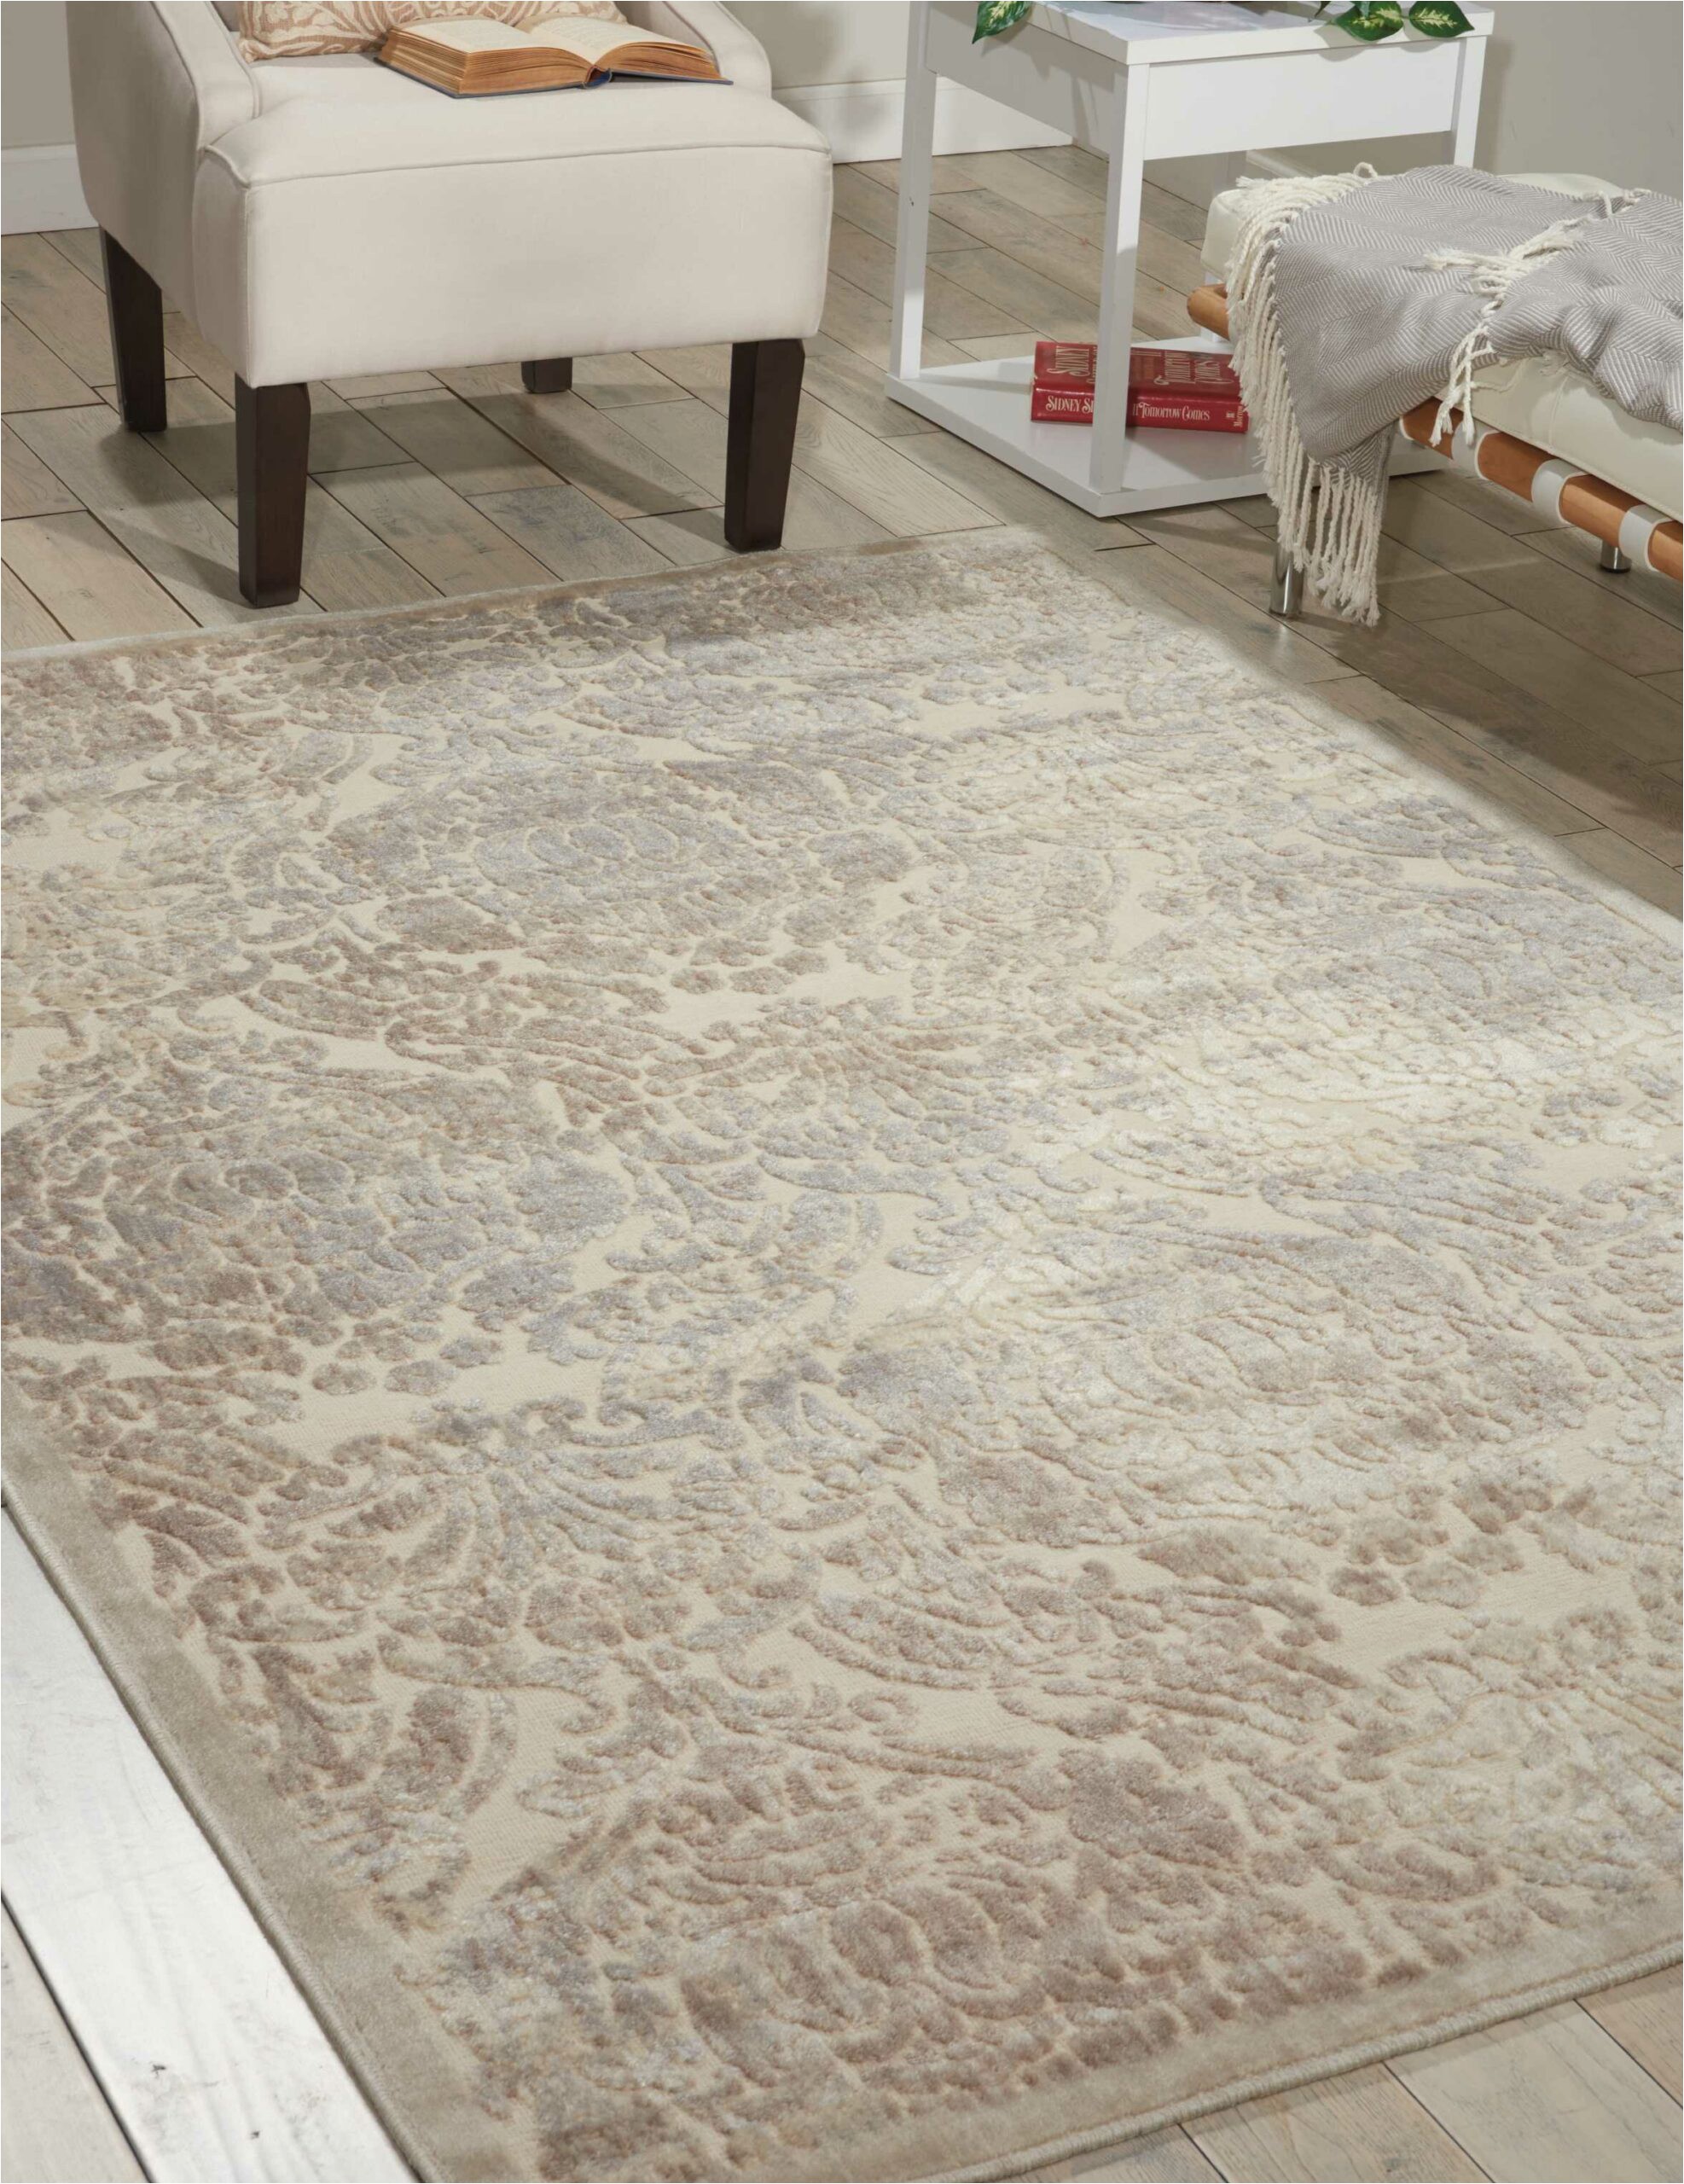 Jcpenney Bathroom Rugs On Sale Drug Rugs for Women area Rug Cleaning fort Lauderdale